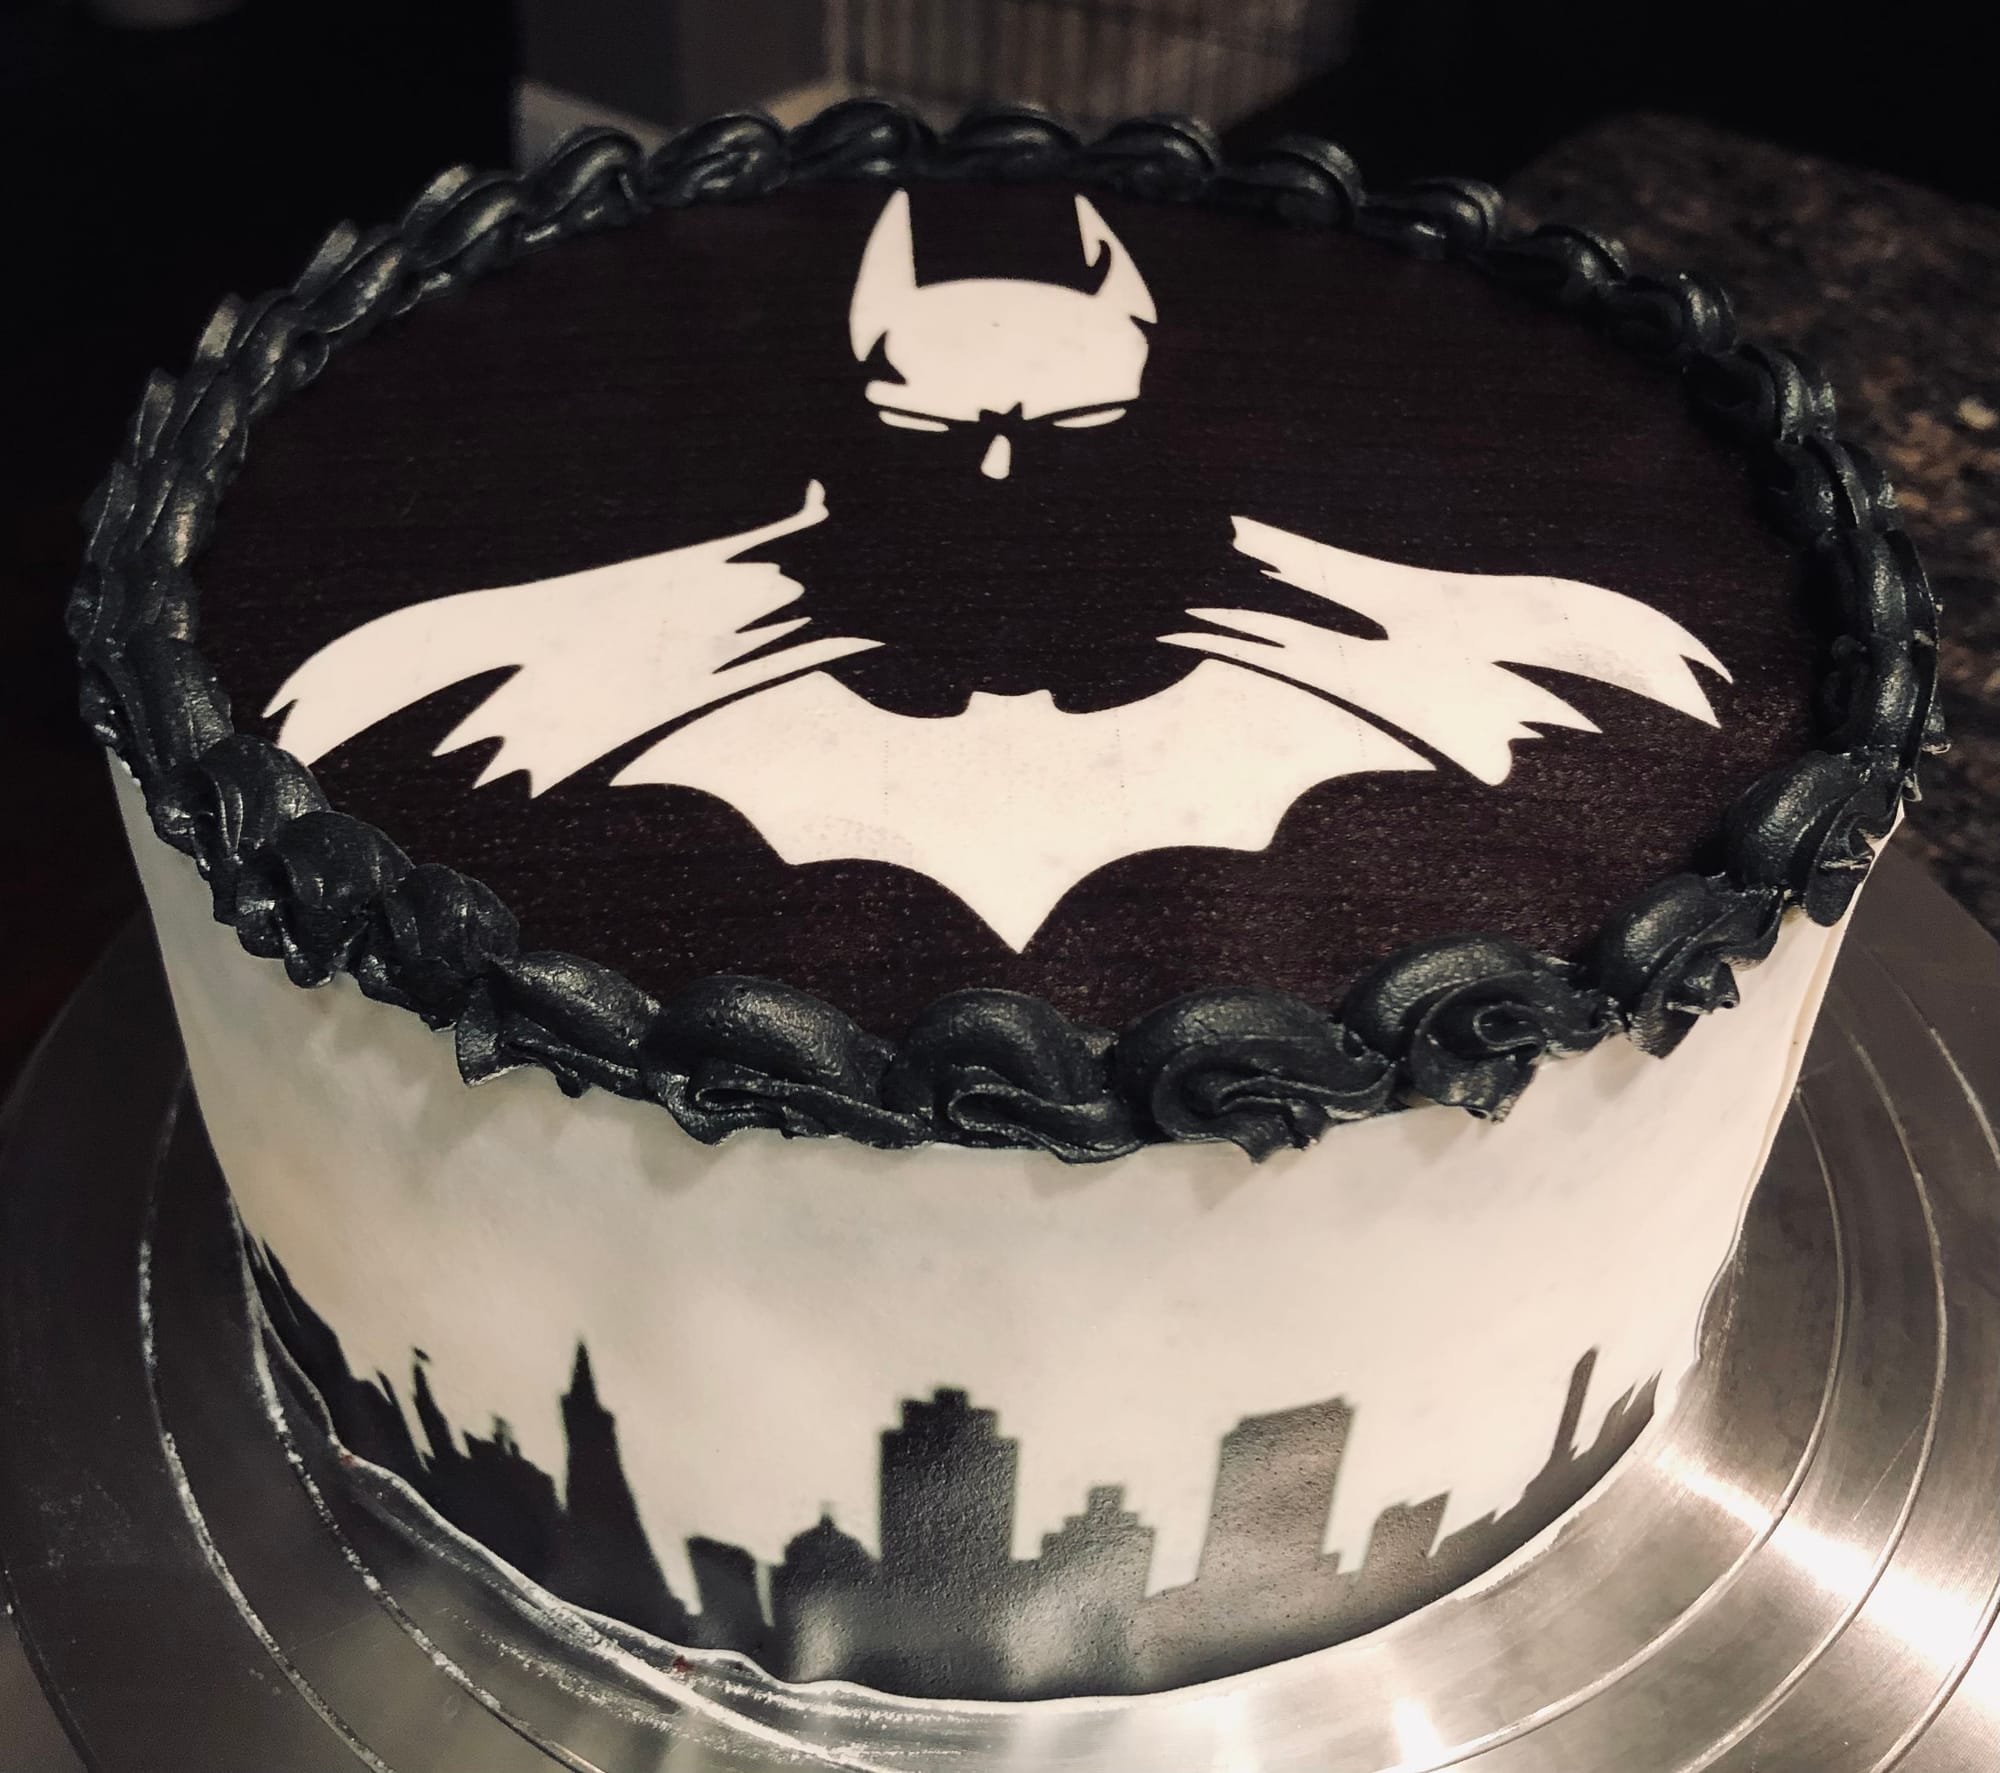 How to Make a Batman Cake: Step-By-Step Tutorial with Images